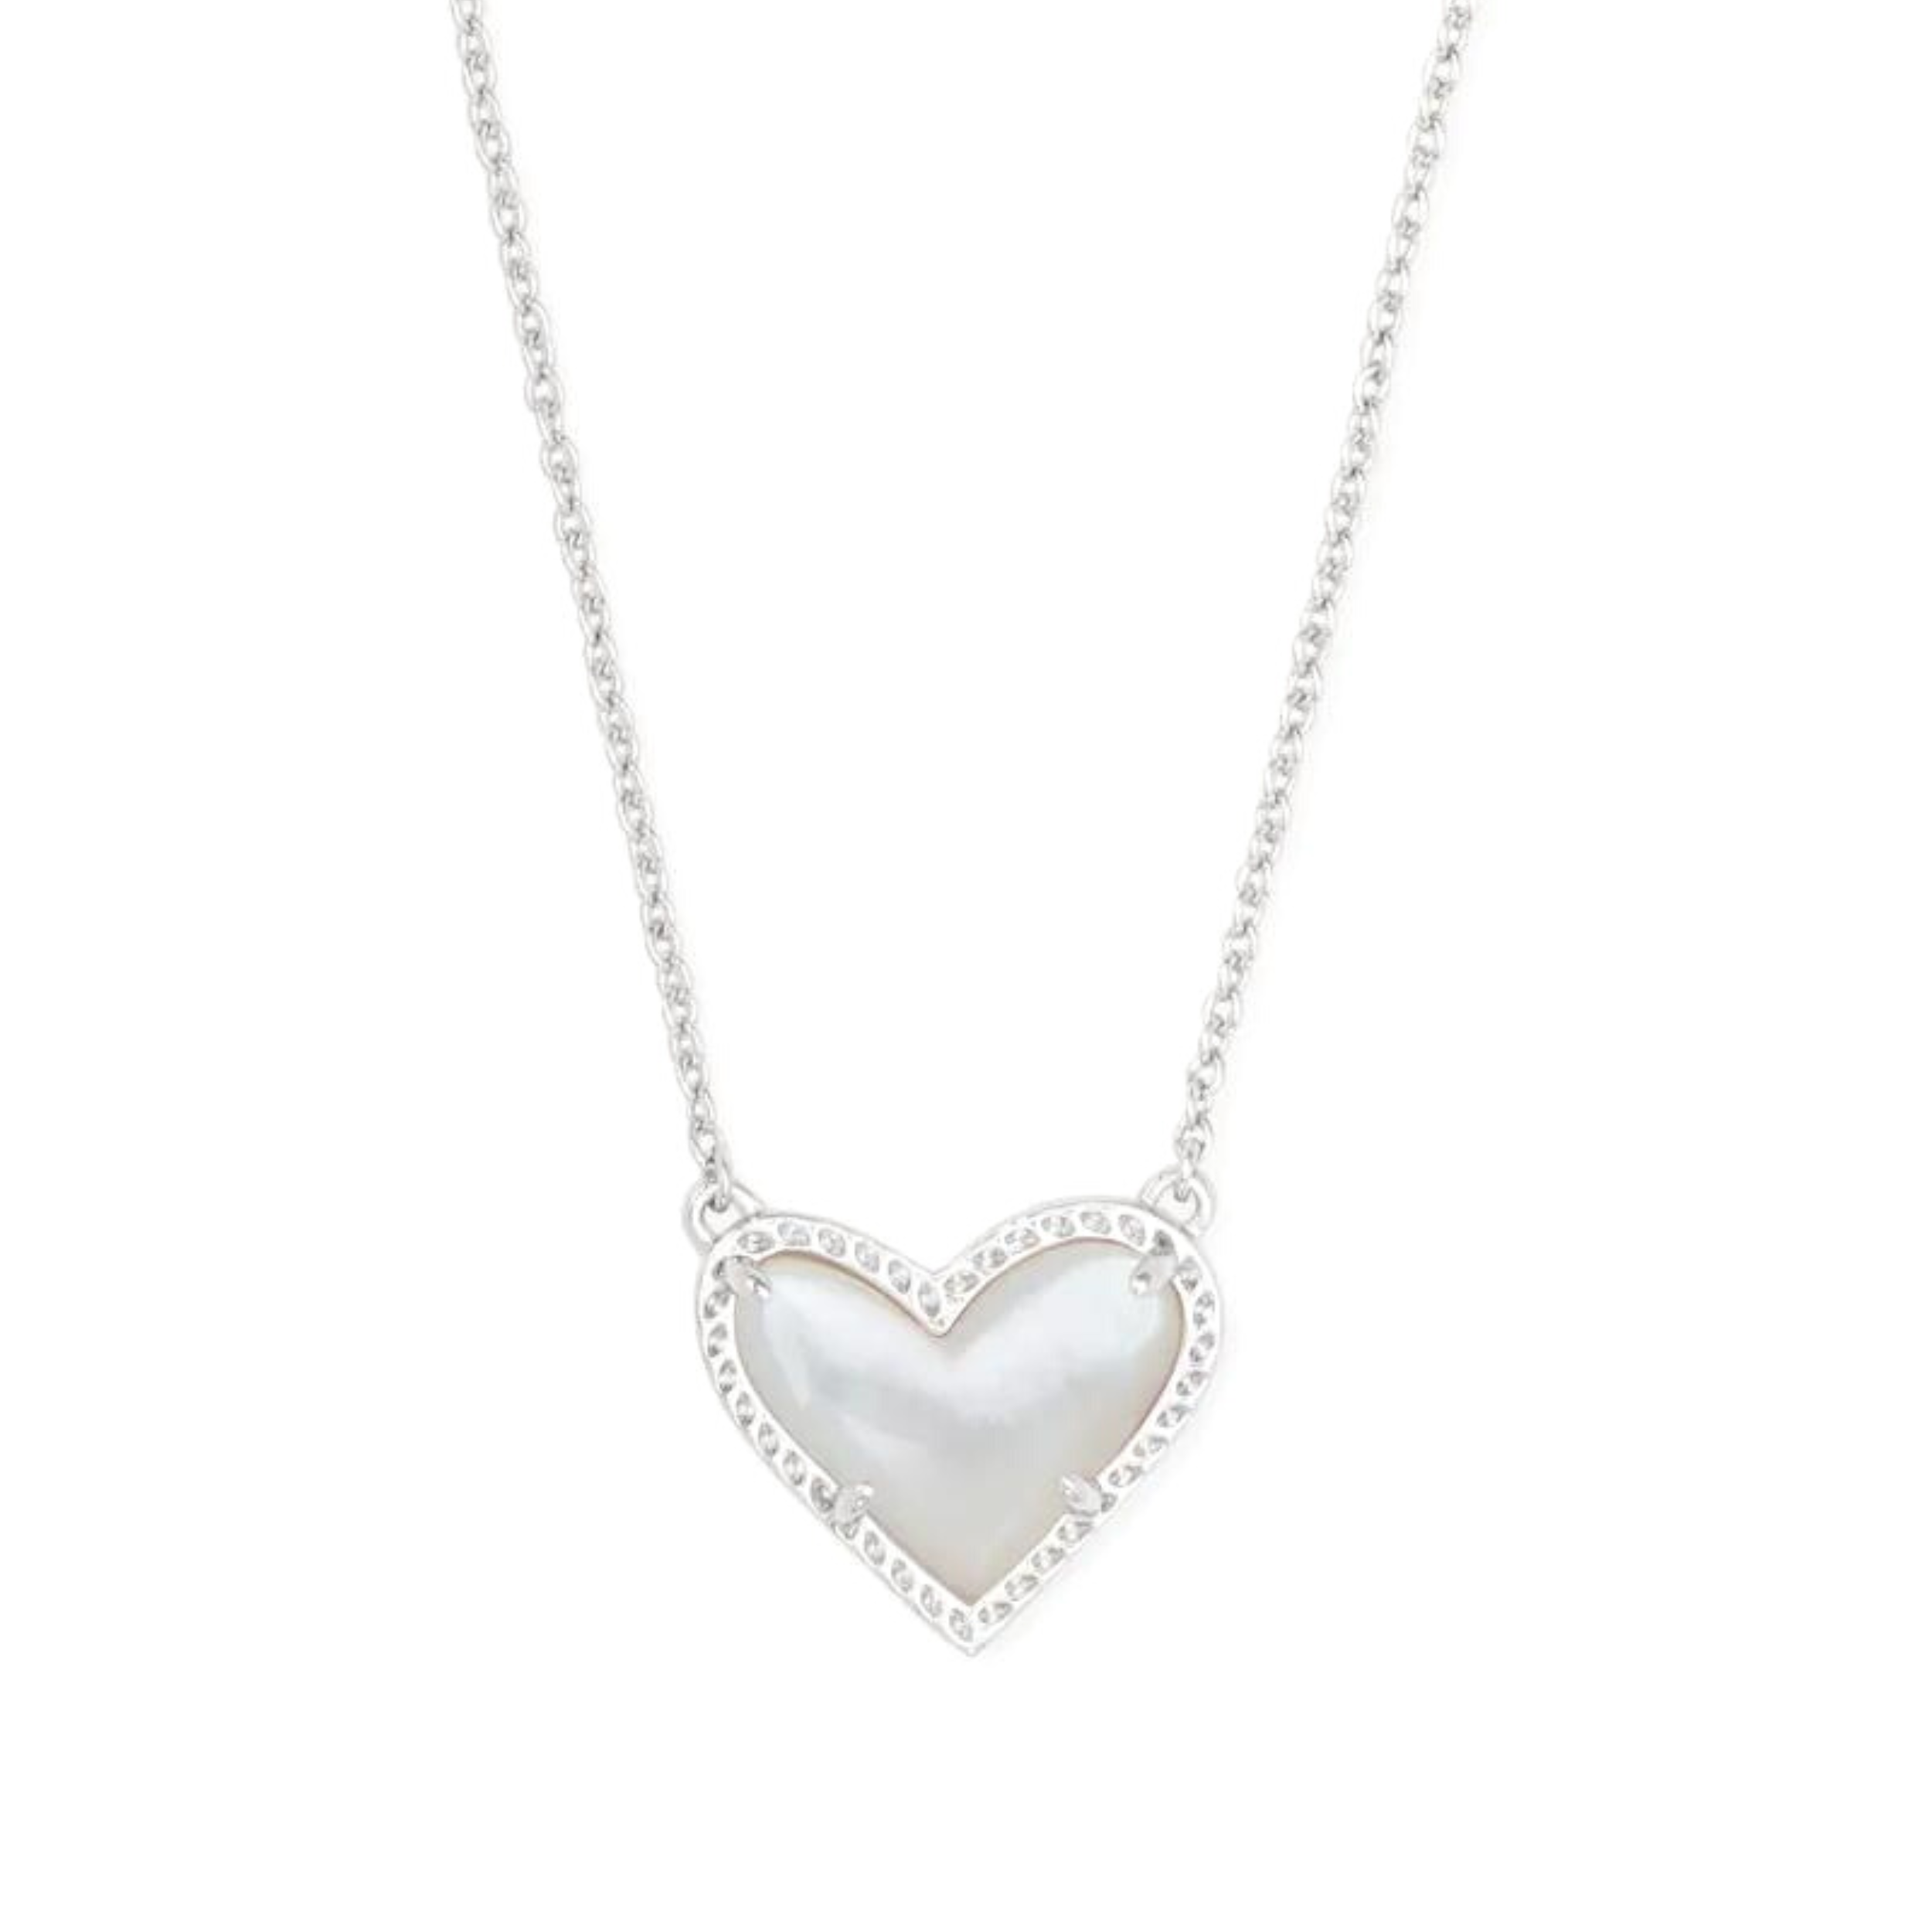 Kendra Scott | Ari Heart Silver Pendant Necklace in Ivory Mother of Pearl - Giddy Up Glamour Boutique